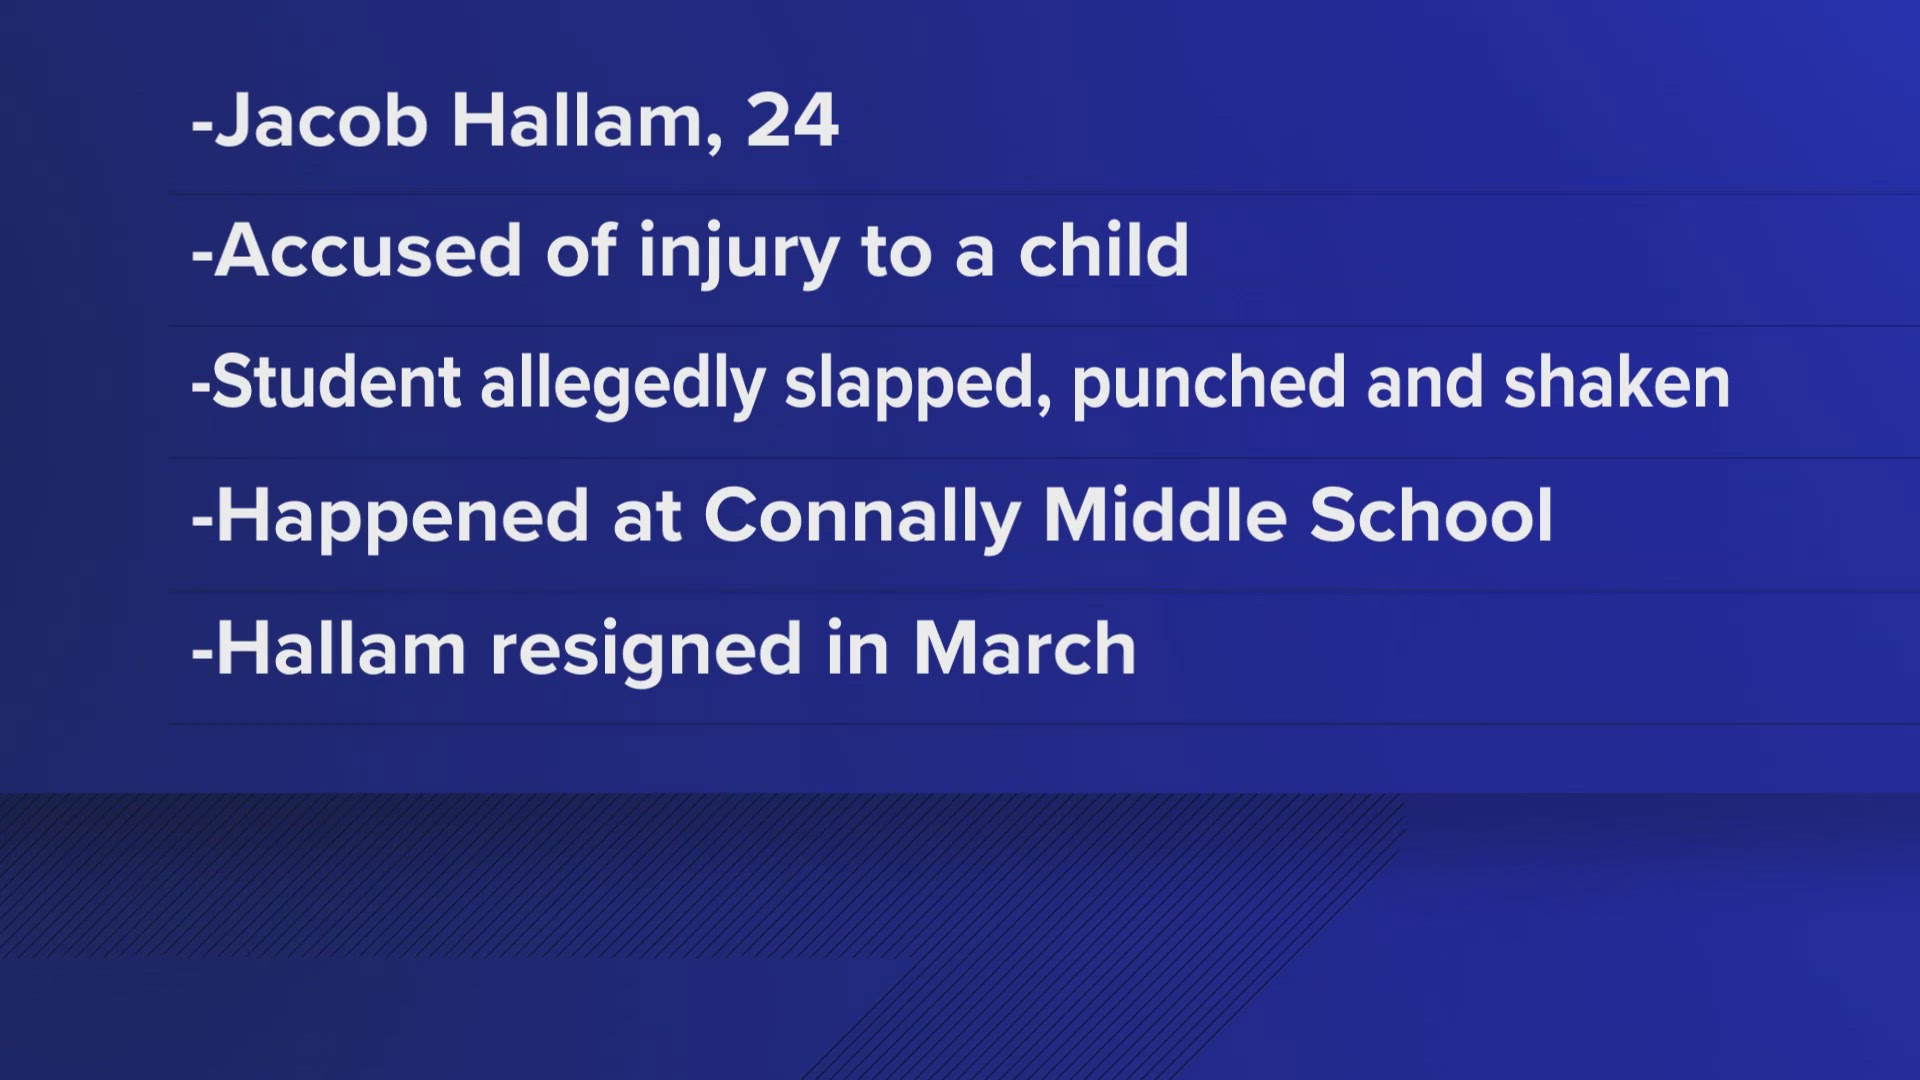 Jacob Hallam faces multiple felony charges of injury to a child.